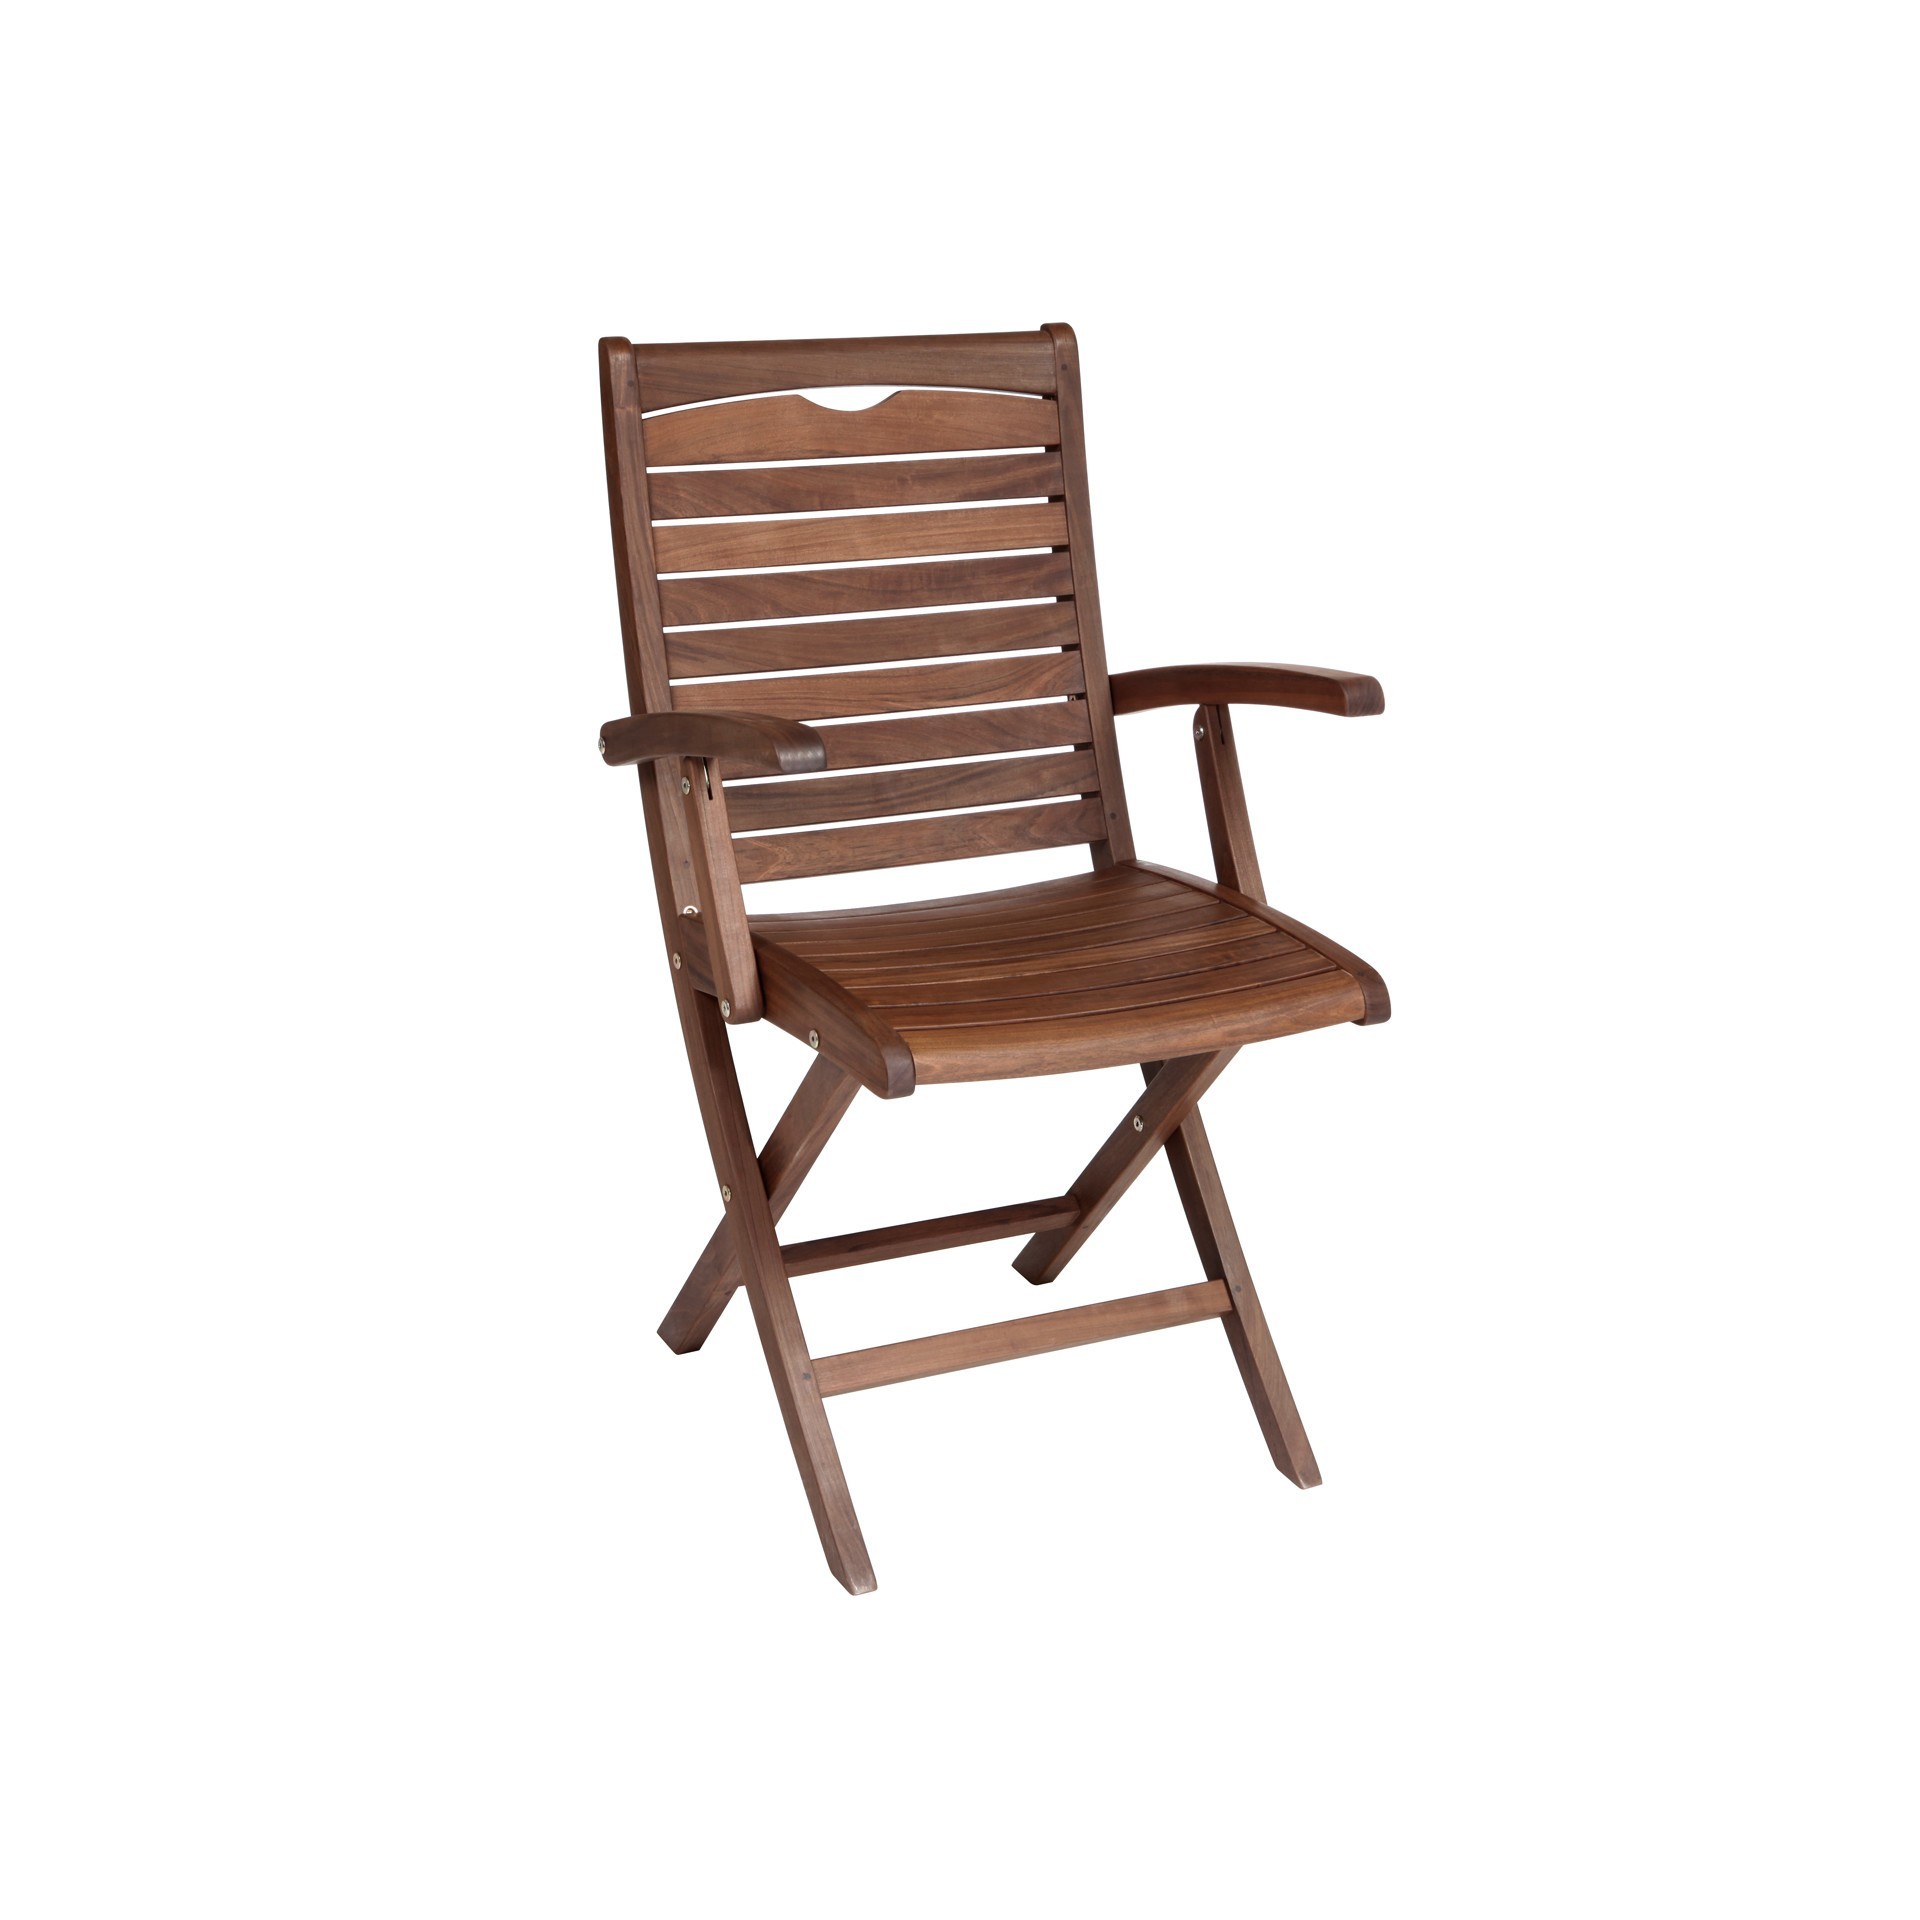 Wooden sling chair front view